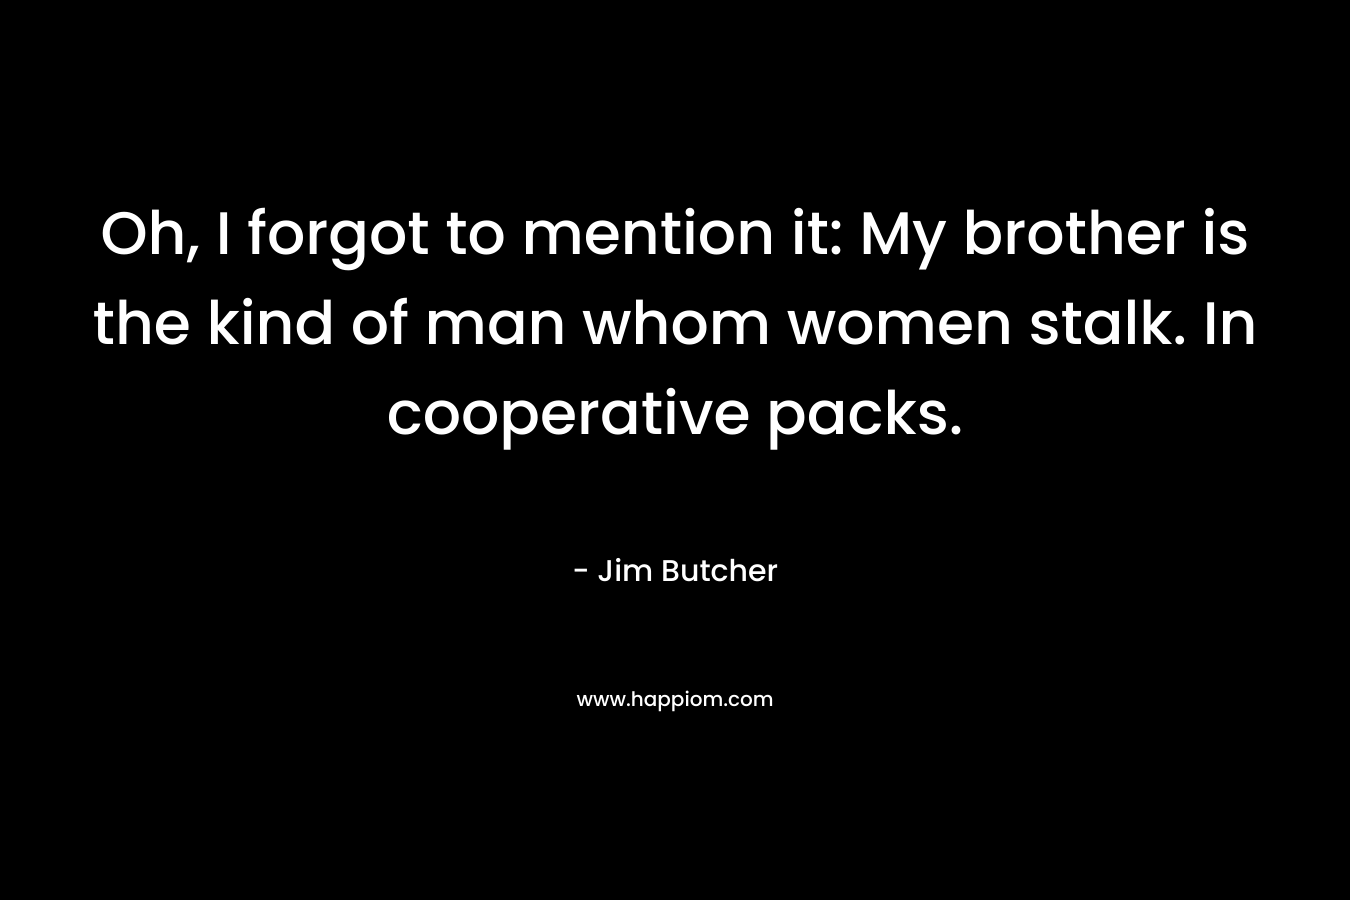 Oh, I forgot to mention it: My brother is the kind of man whom women stalk. In cooperative packs. – Jim Butcher